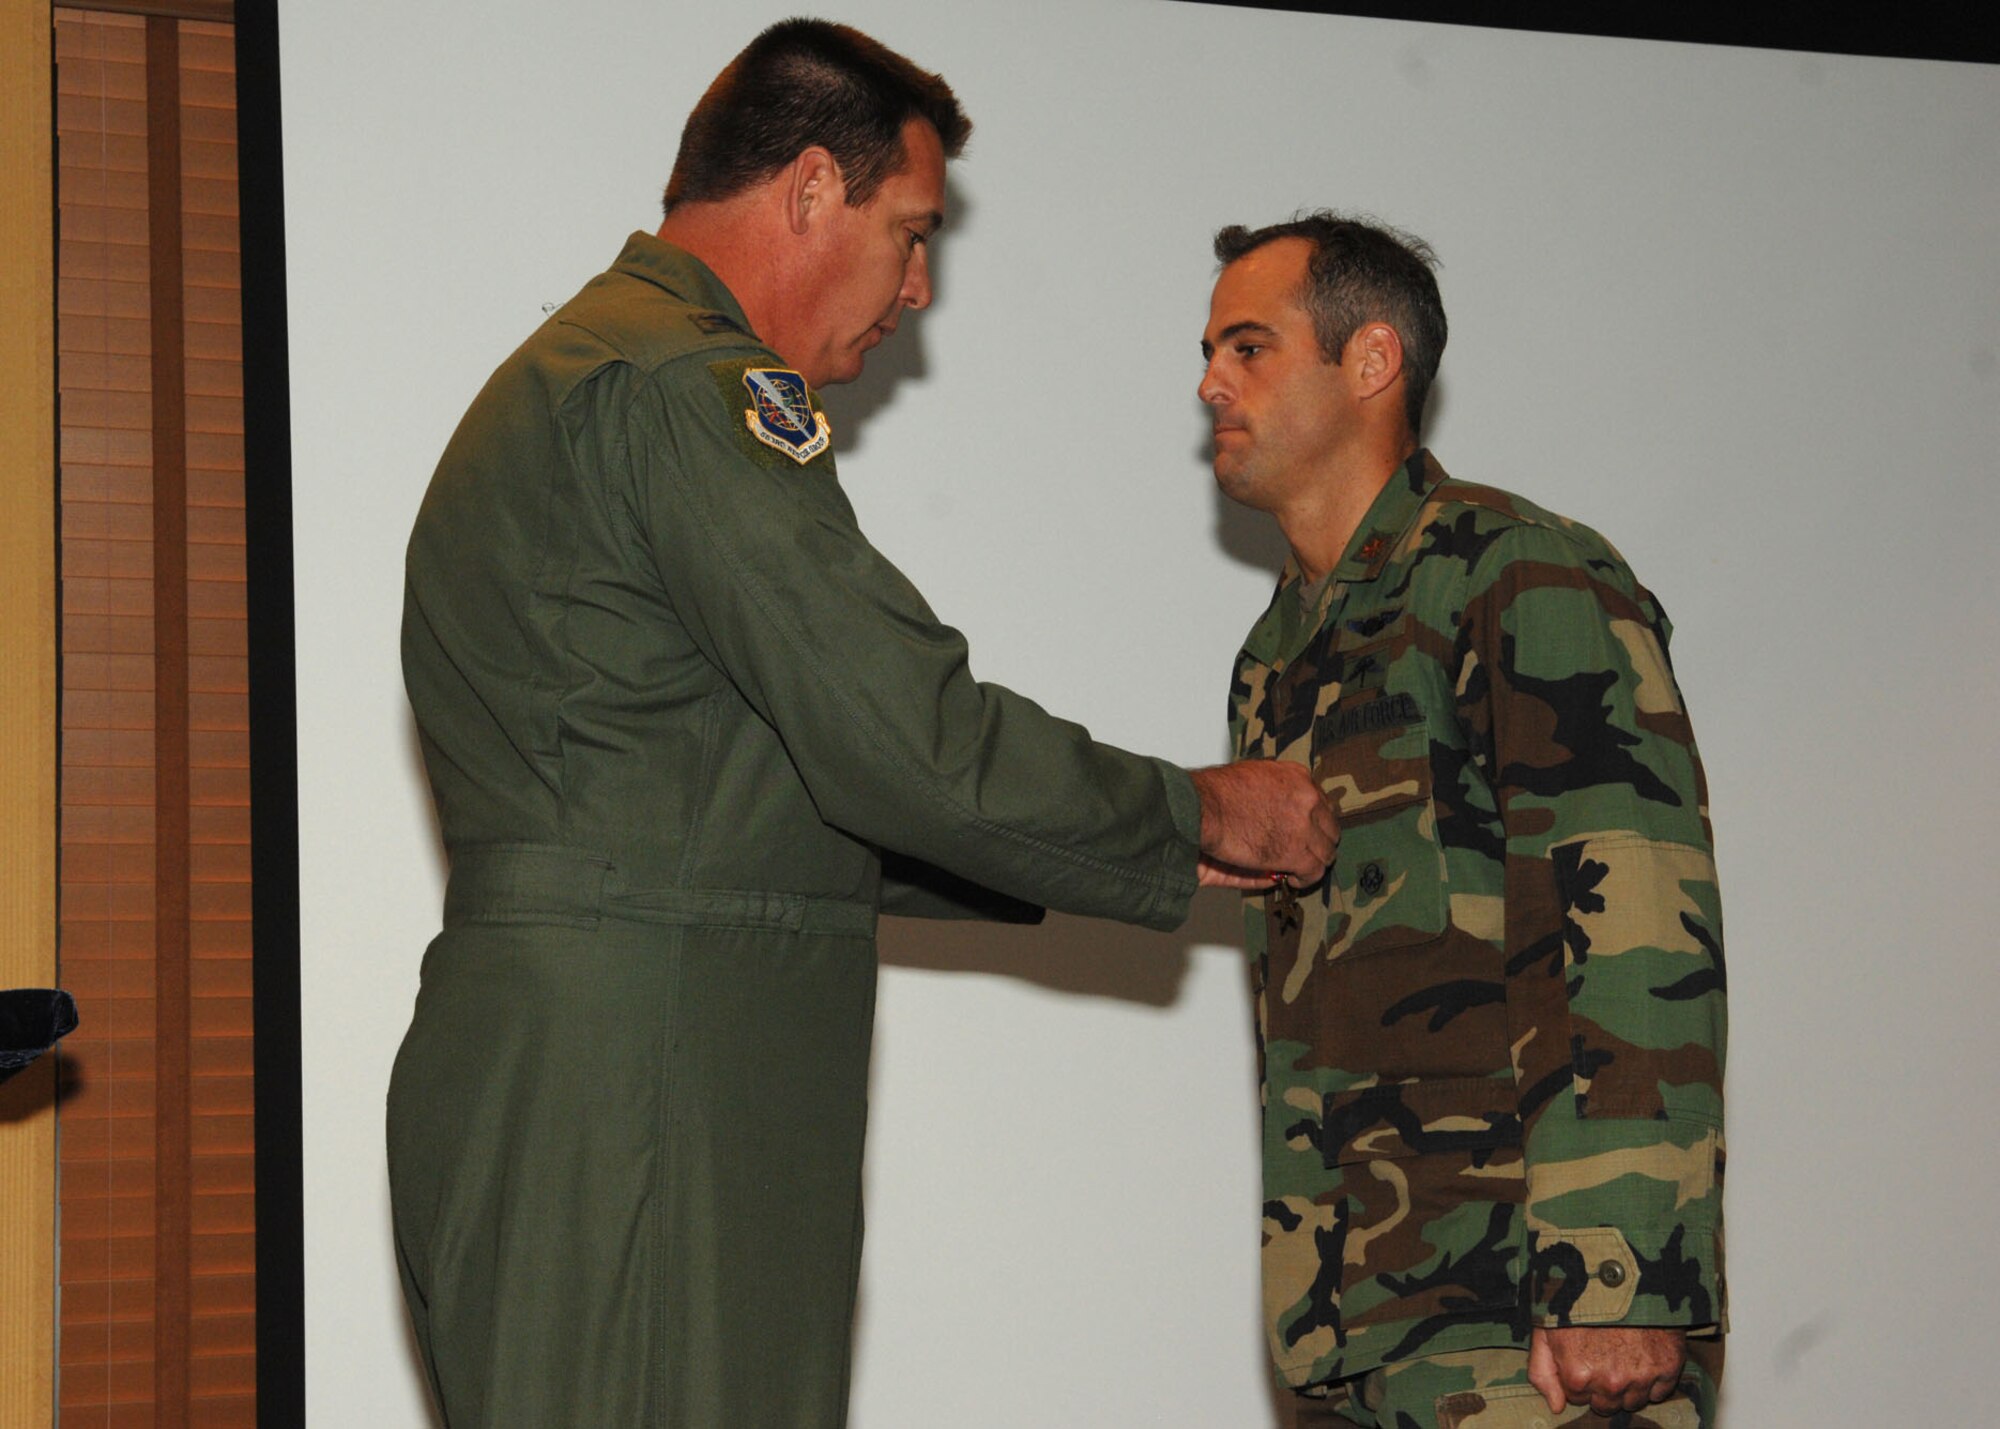 Col. Lee DePalo, 563rd Rescue Group commander, presents the Bronze Star Medal to Capt. Patrick O’Rourke during a commander’s call at the Officers’ Club here July 25.  Captain O’Rourke was awarded the Bronze Star for his meritorious service as a combat rescue officer while deployed to Afghanistan from May 5, 2006 to May 7, 2007.  During this period, while exposed to extreme danger from hostile machine gun fire and rocket attacks, Captain O’Rourke courageously led his team of four pararescuemen during recovery operations of a crashed CH-47 helicopter.  (U.S. Air Force photo by Senior Airman Alesia Goosic)